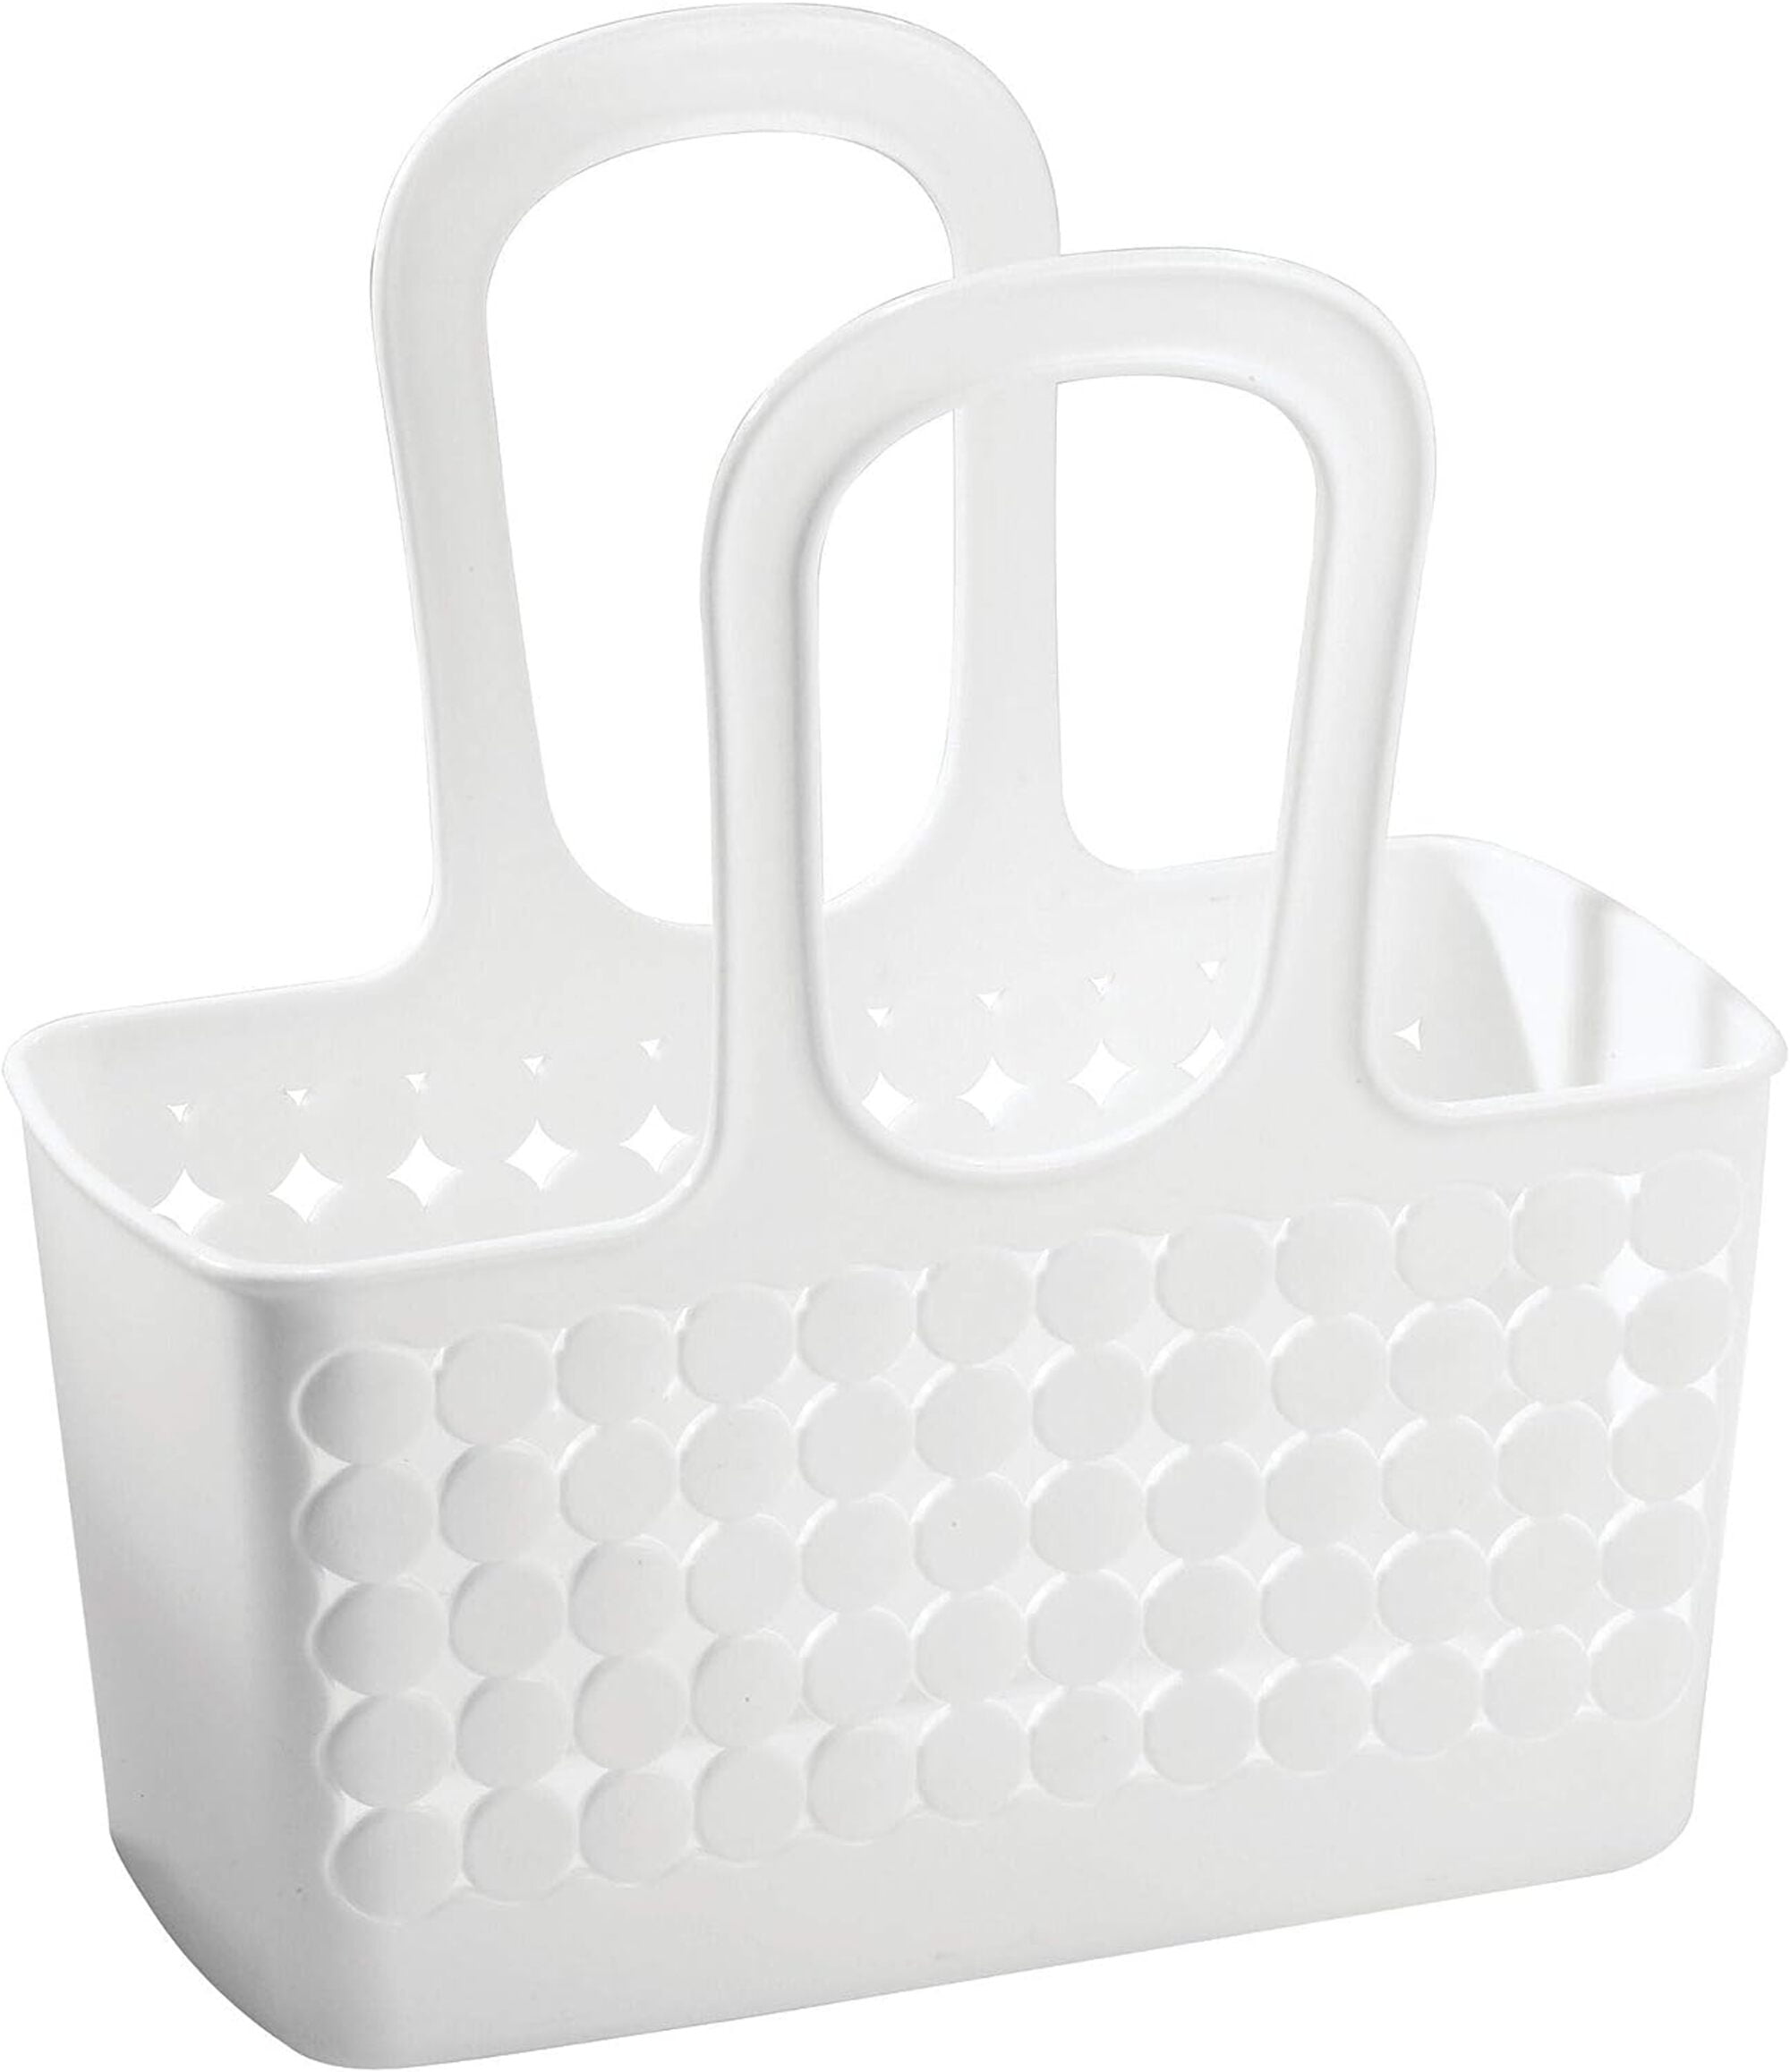 Interdesign Orbz Bathroom Shower Tote for Shampoo Cosmetics Beauty Products - Small White